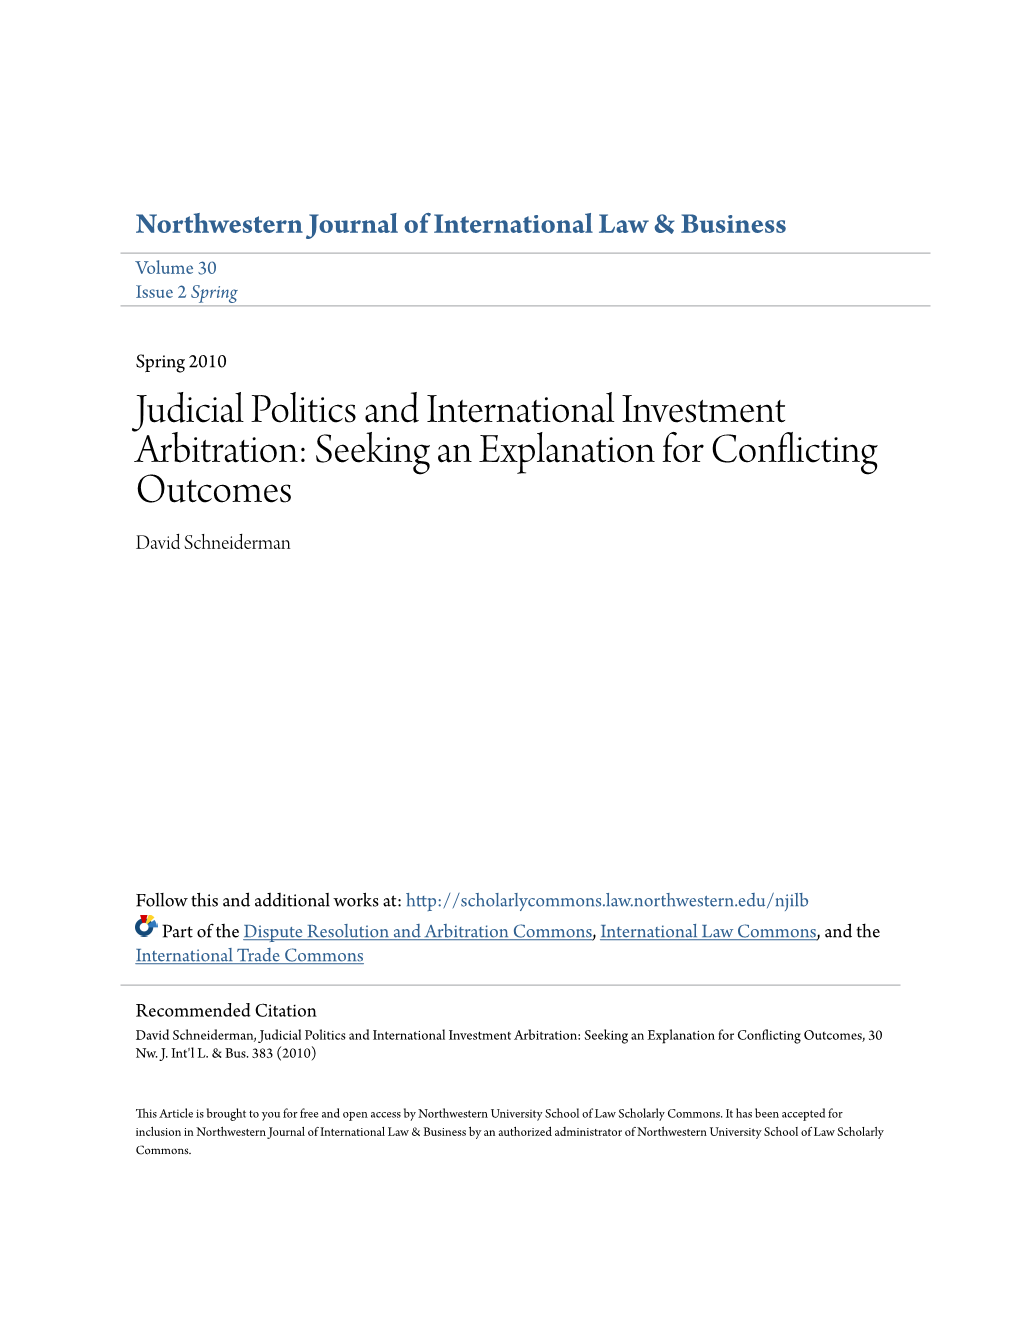 Judicial Politics and International Investment Arbitration: Seeking an Explanation for Conflicting Outcomes David Schneiderman